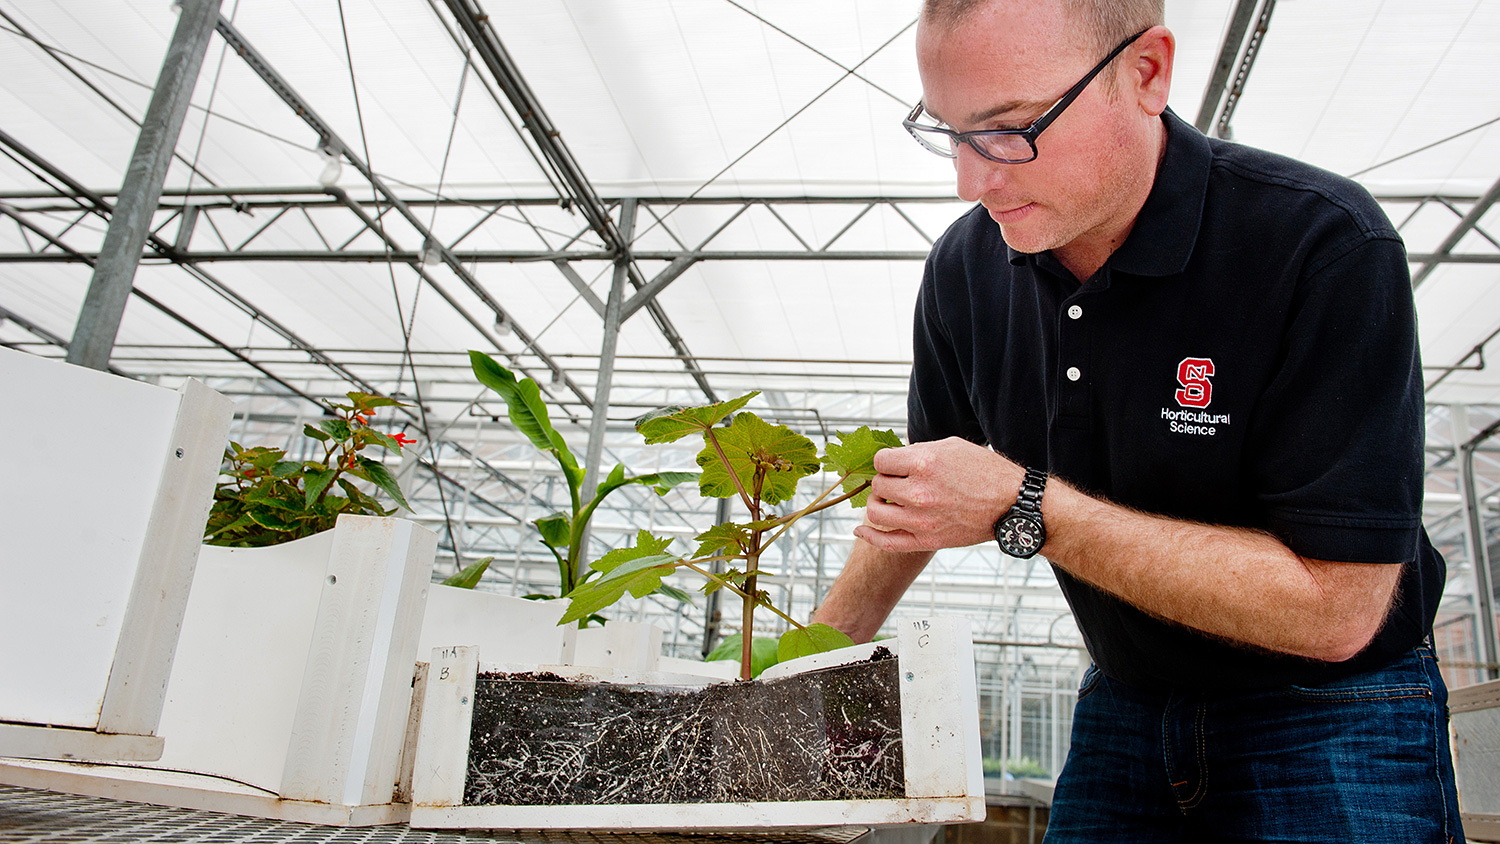 Researcher tests growing substrate